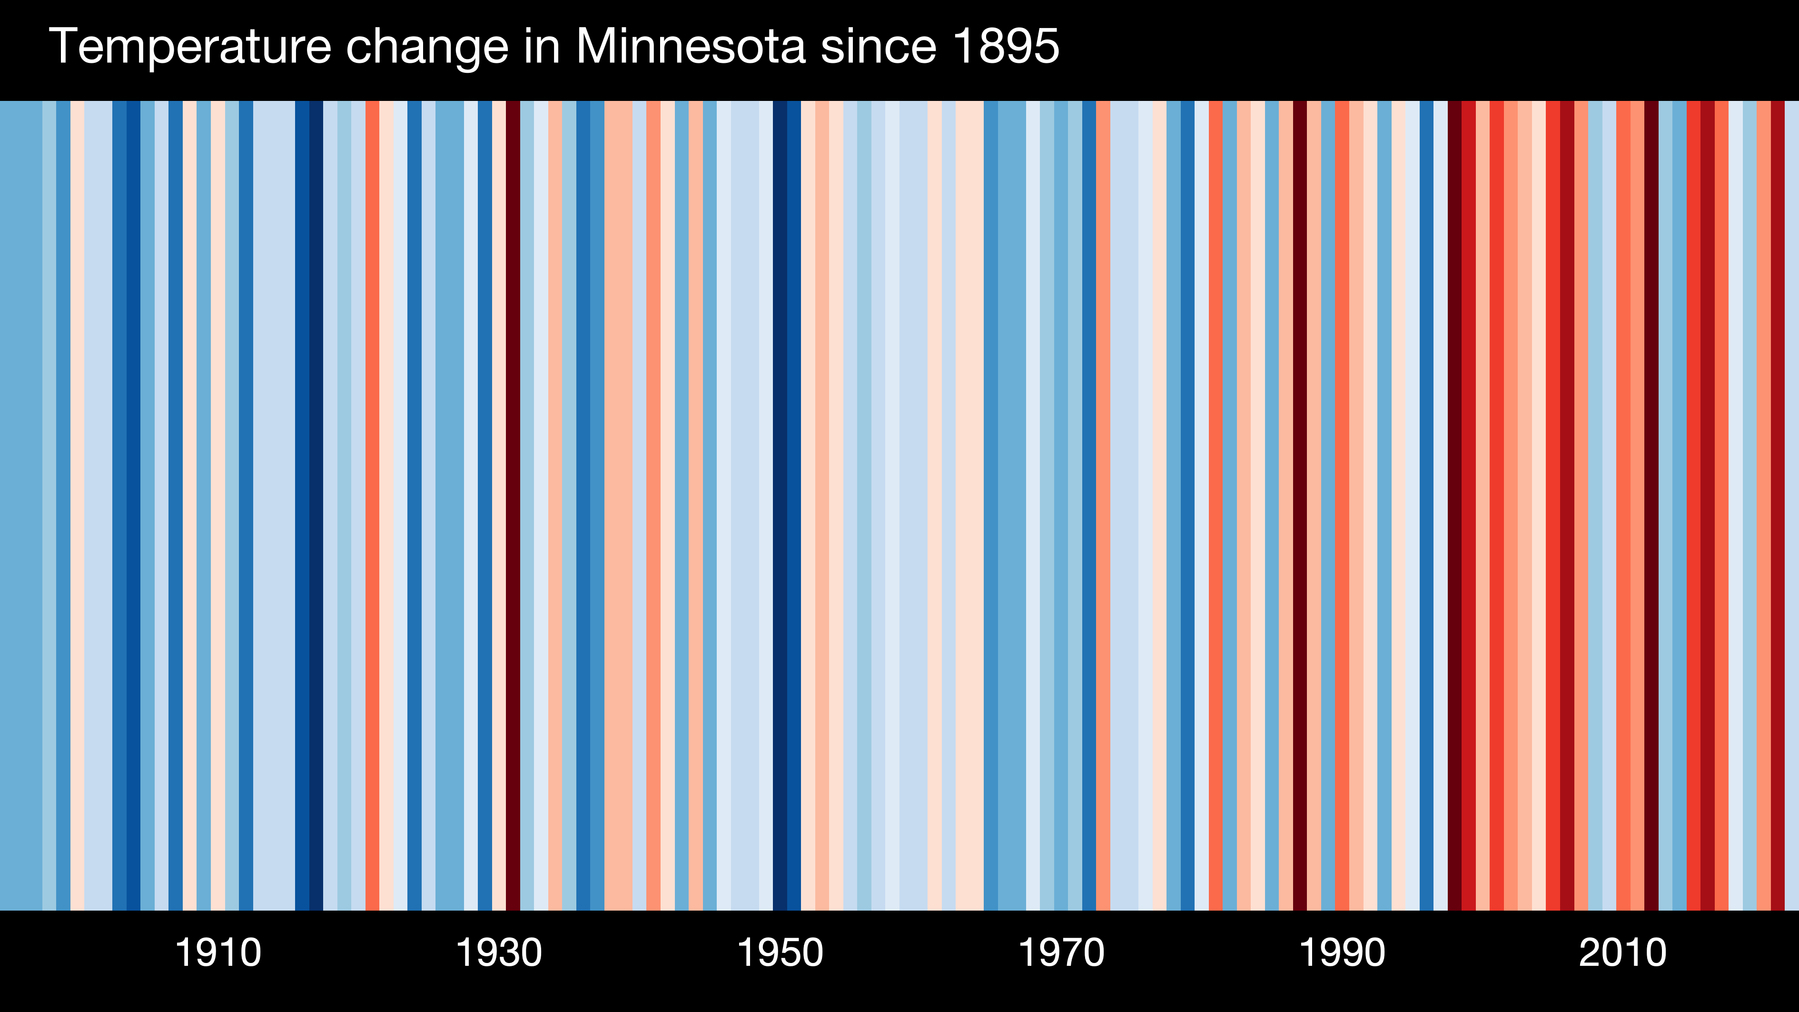 Vertical stripes that are redder to the right, representing higher temperatures more recently than in the past. 